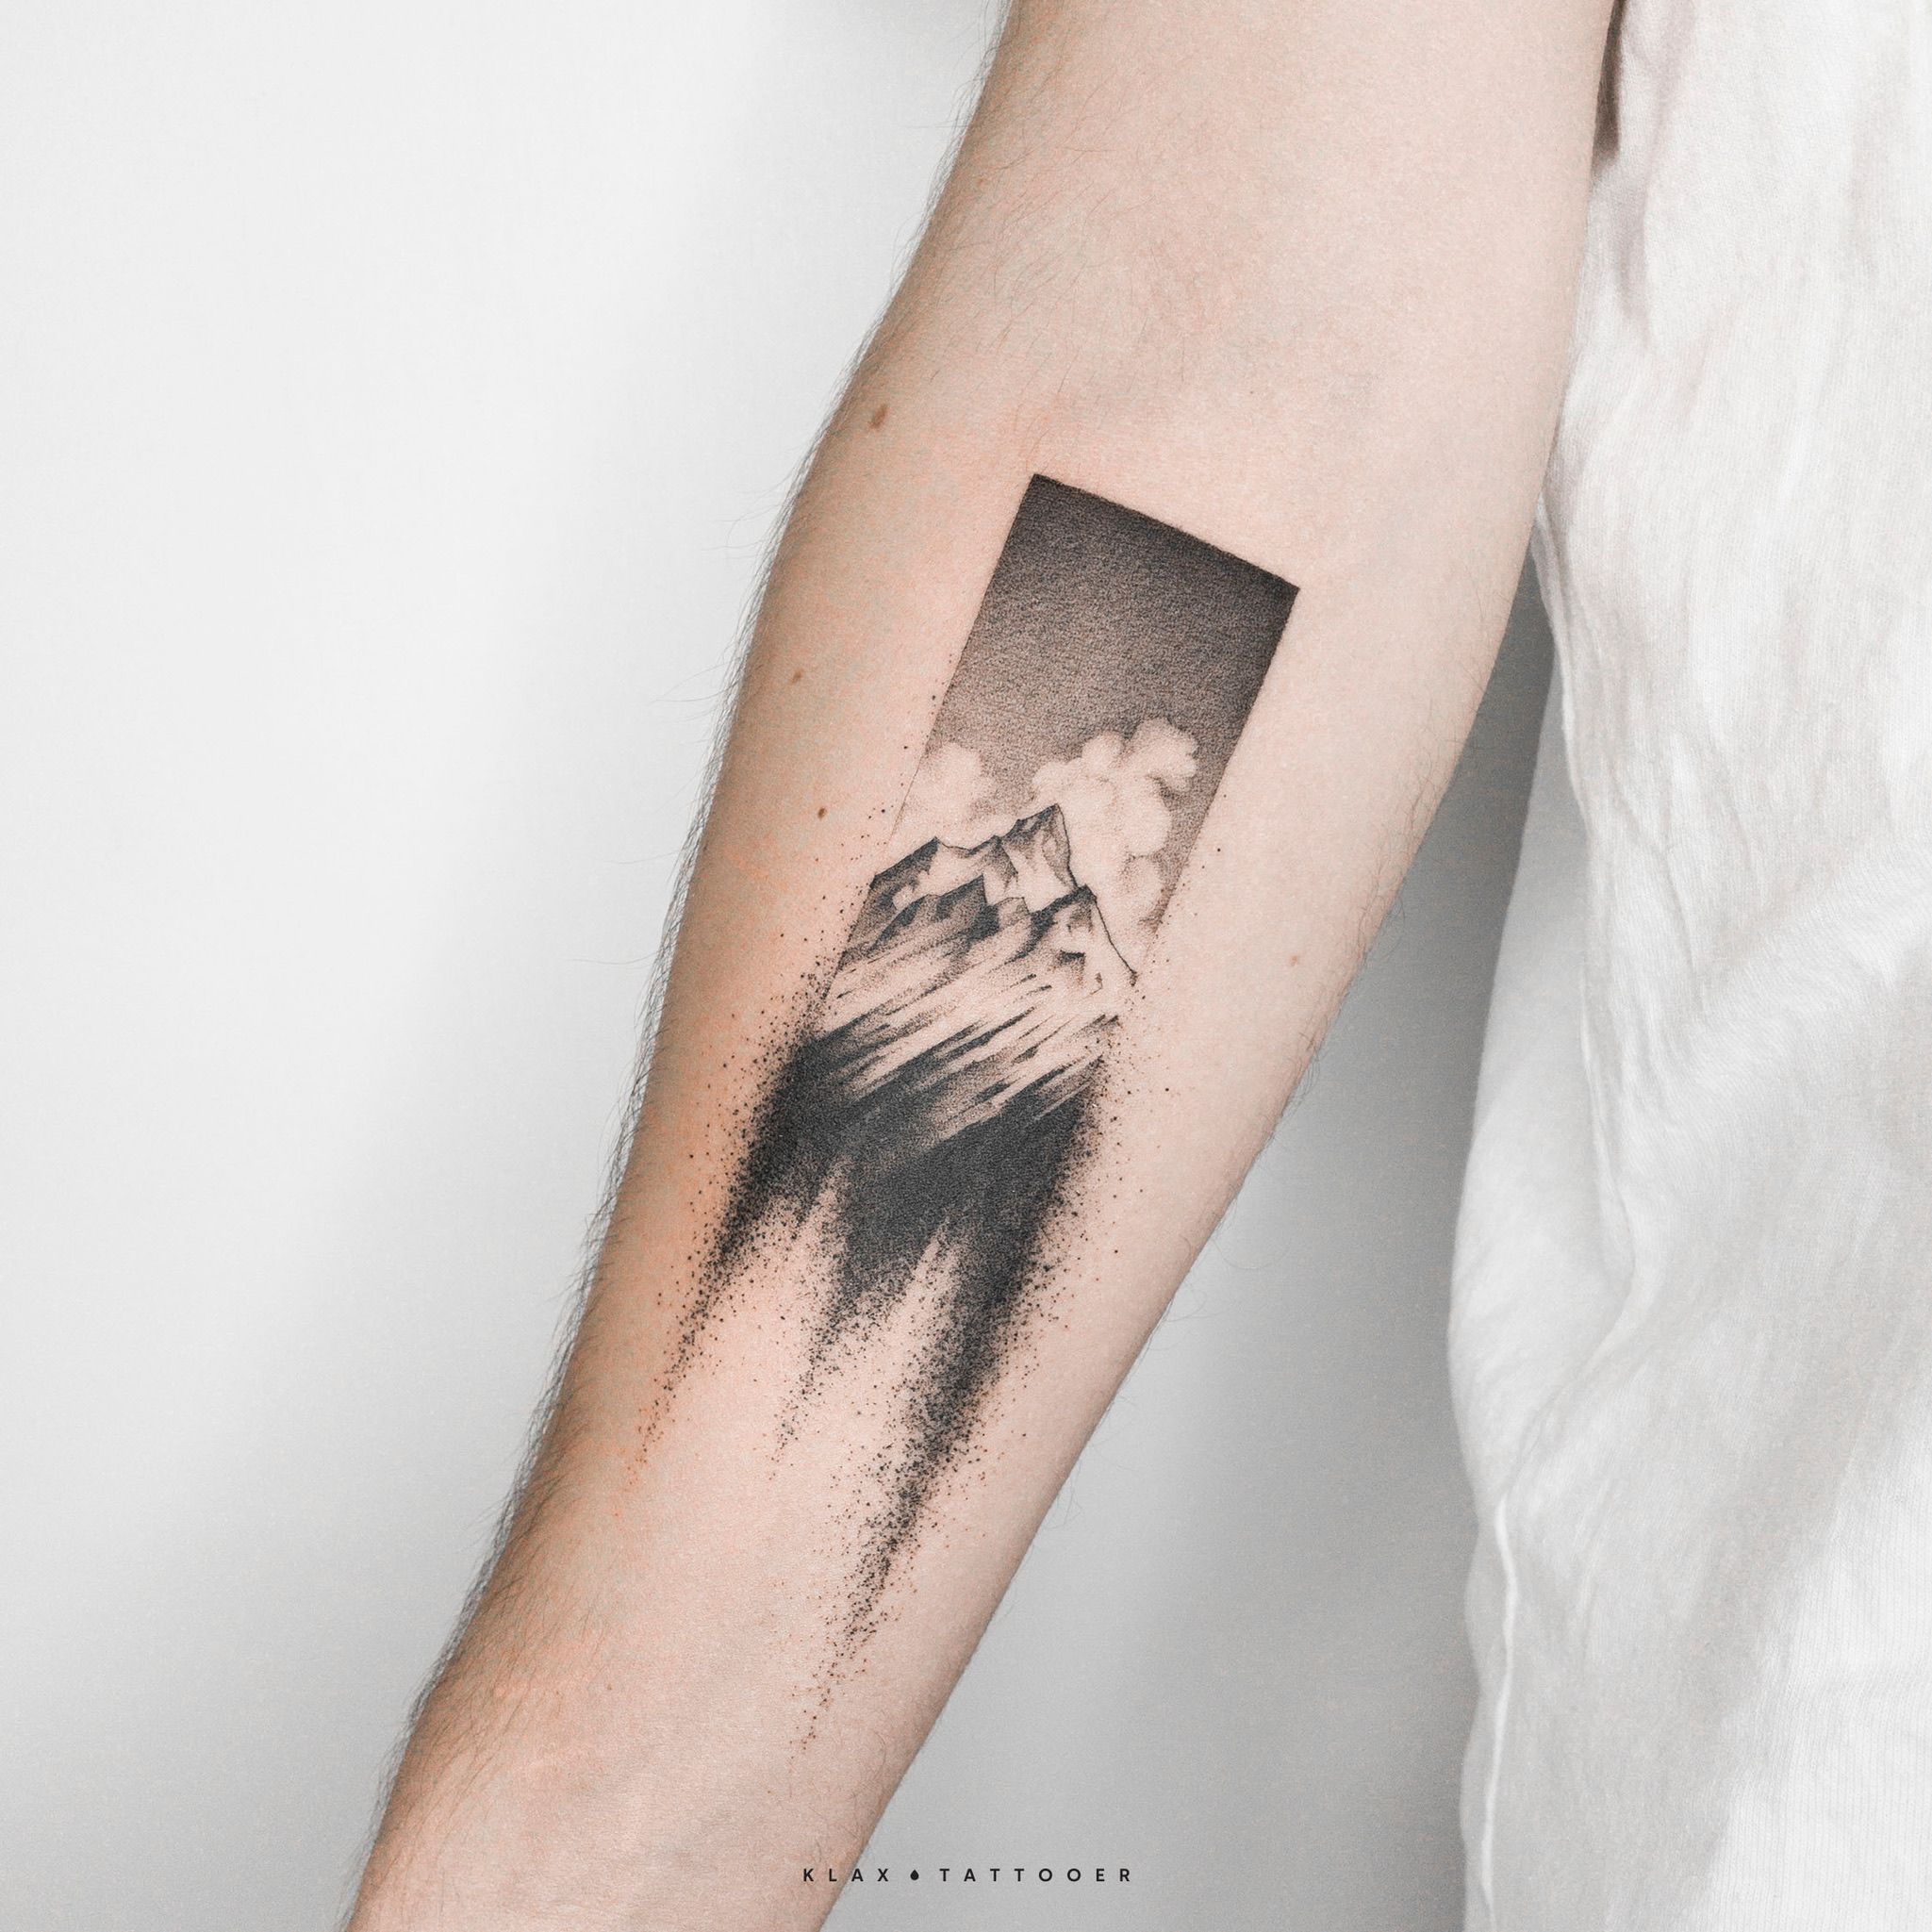 Tattoo made by Kuharska at INKsearch